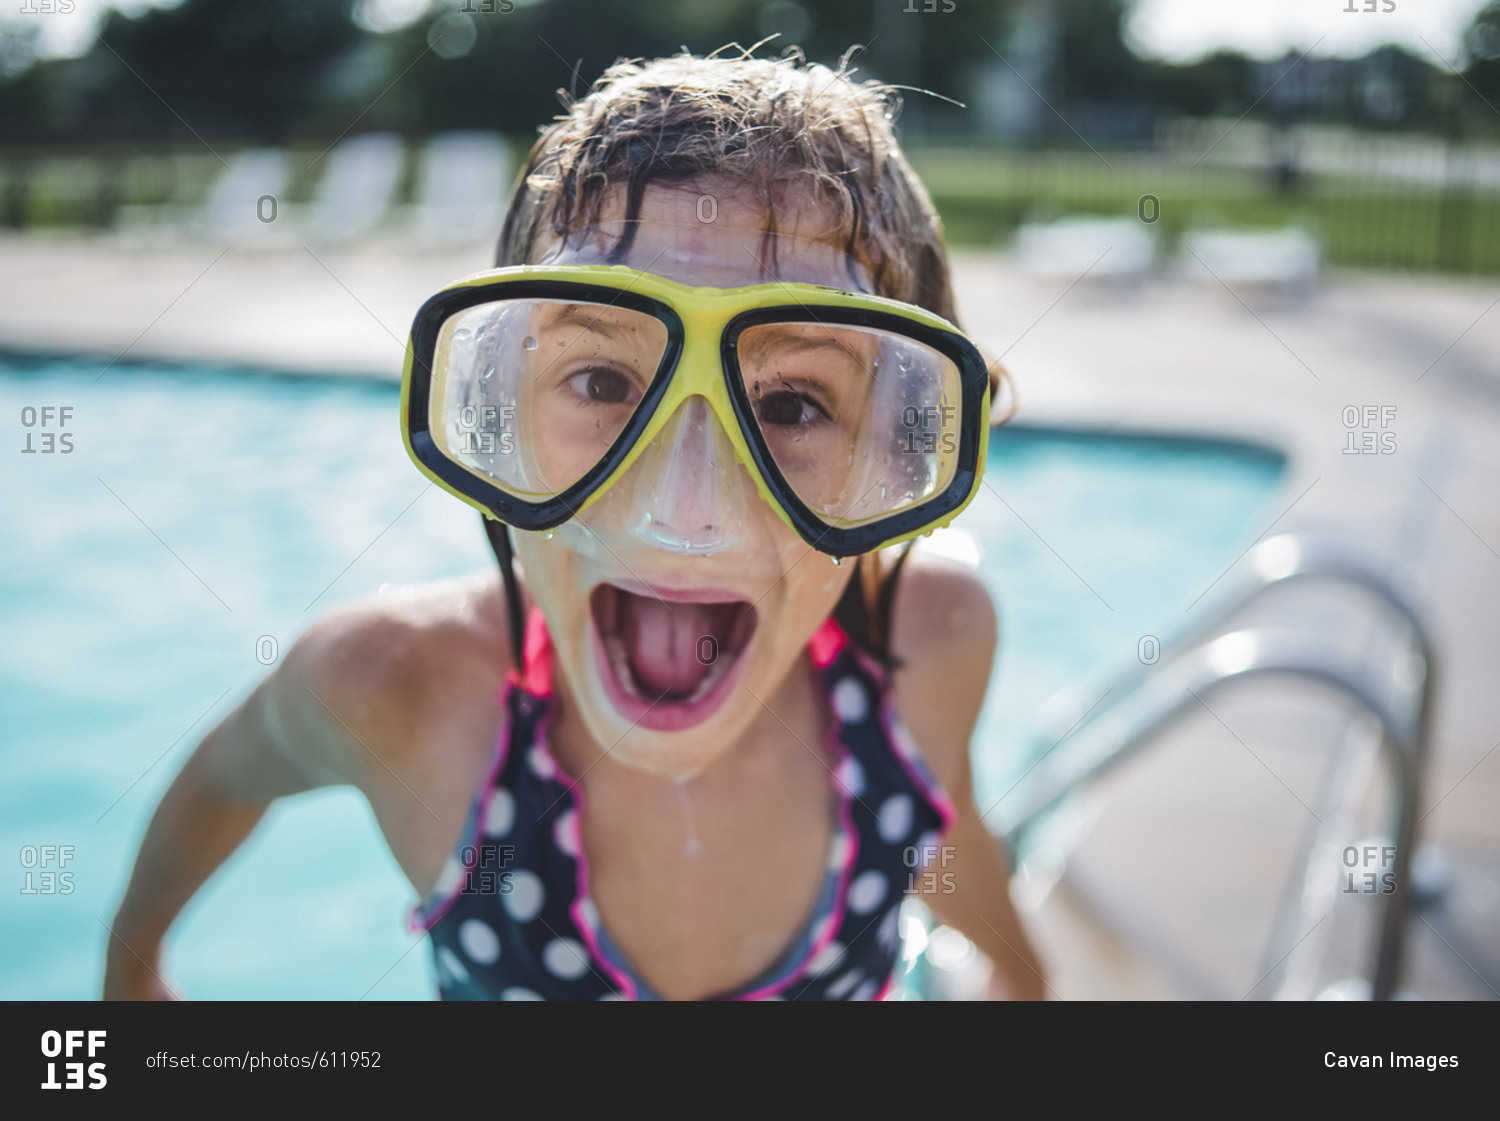 Portrait of girl with mouth open wearing swimming goggles while standing on poolside